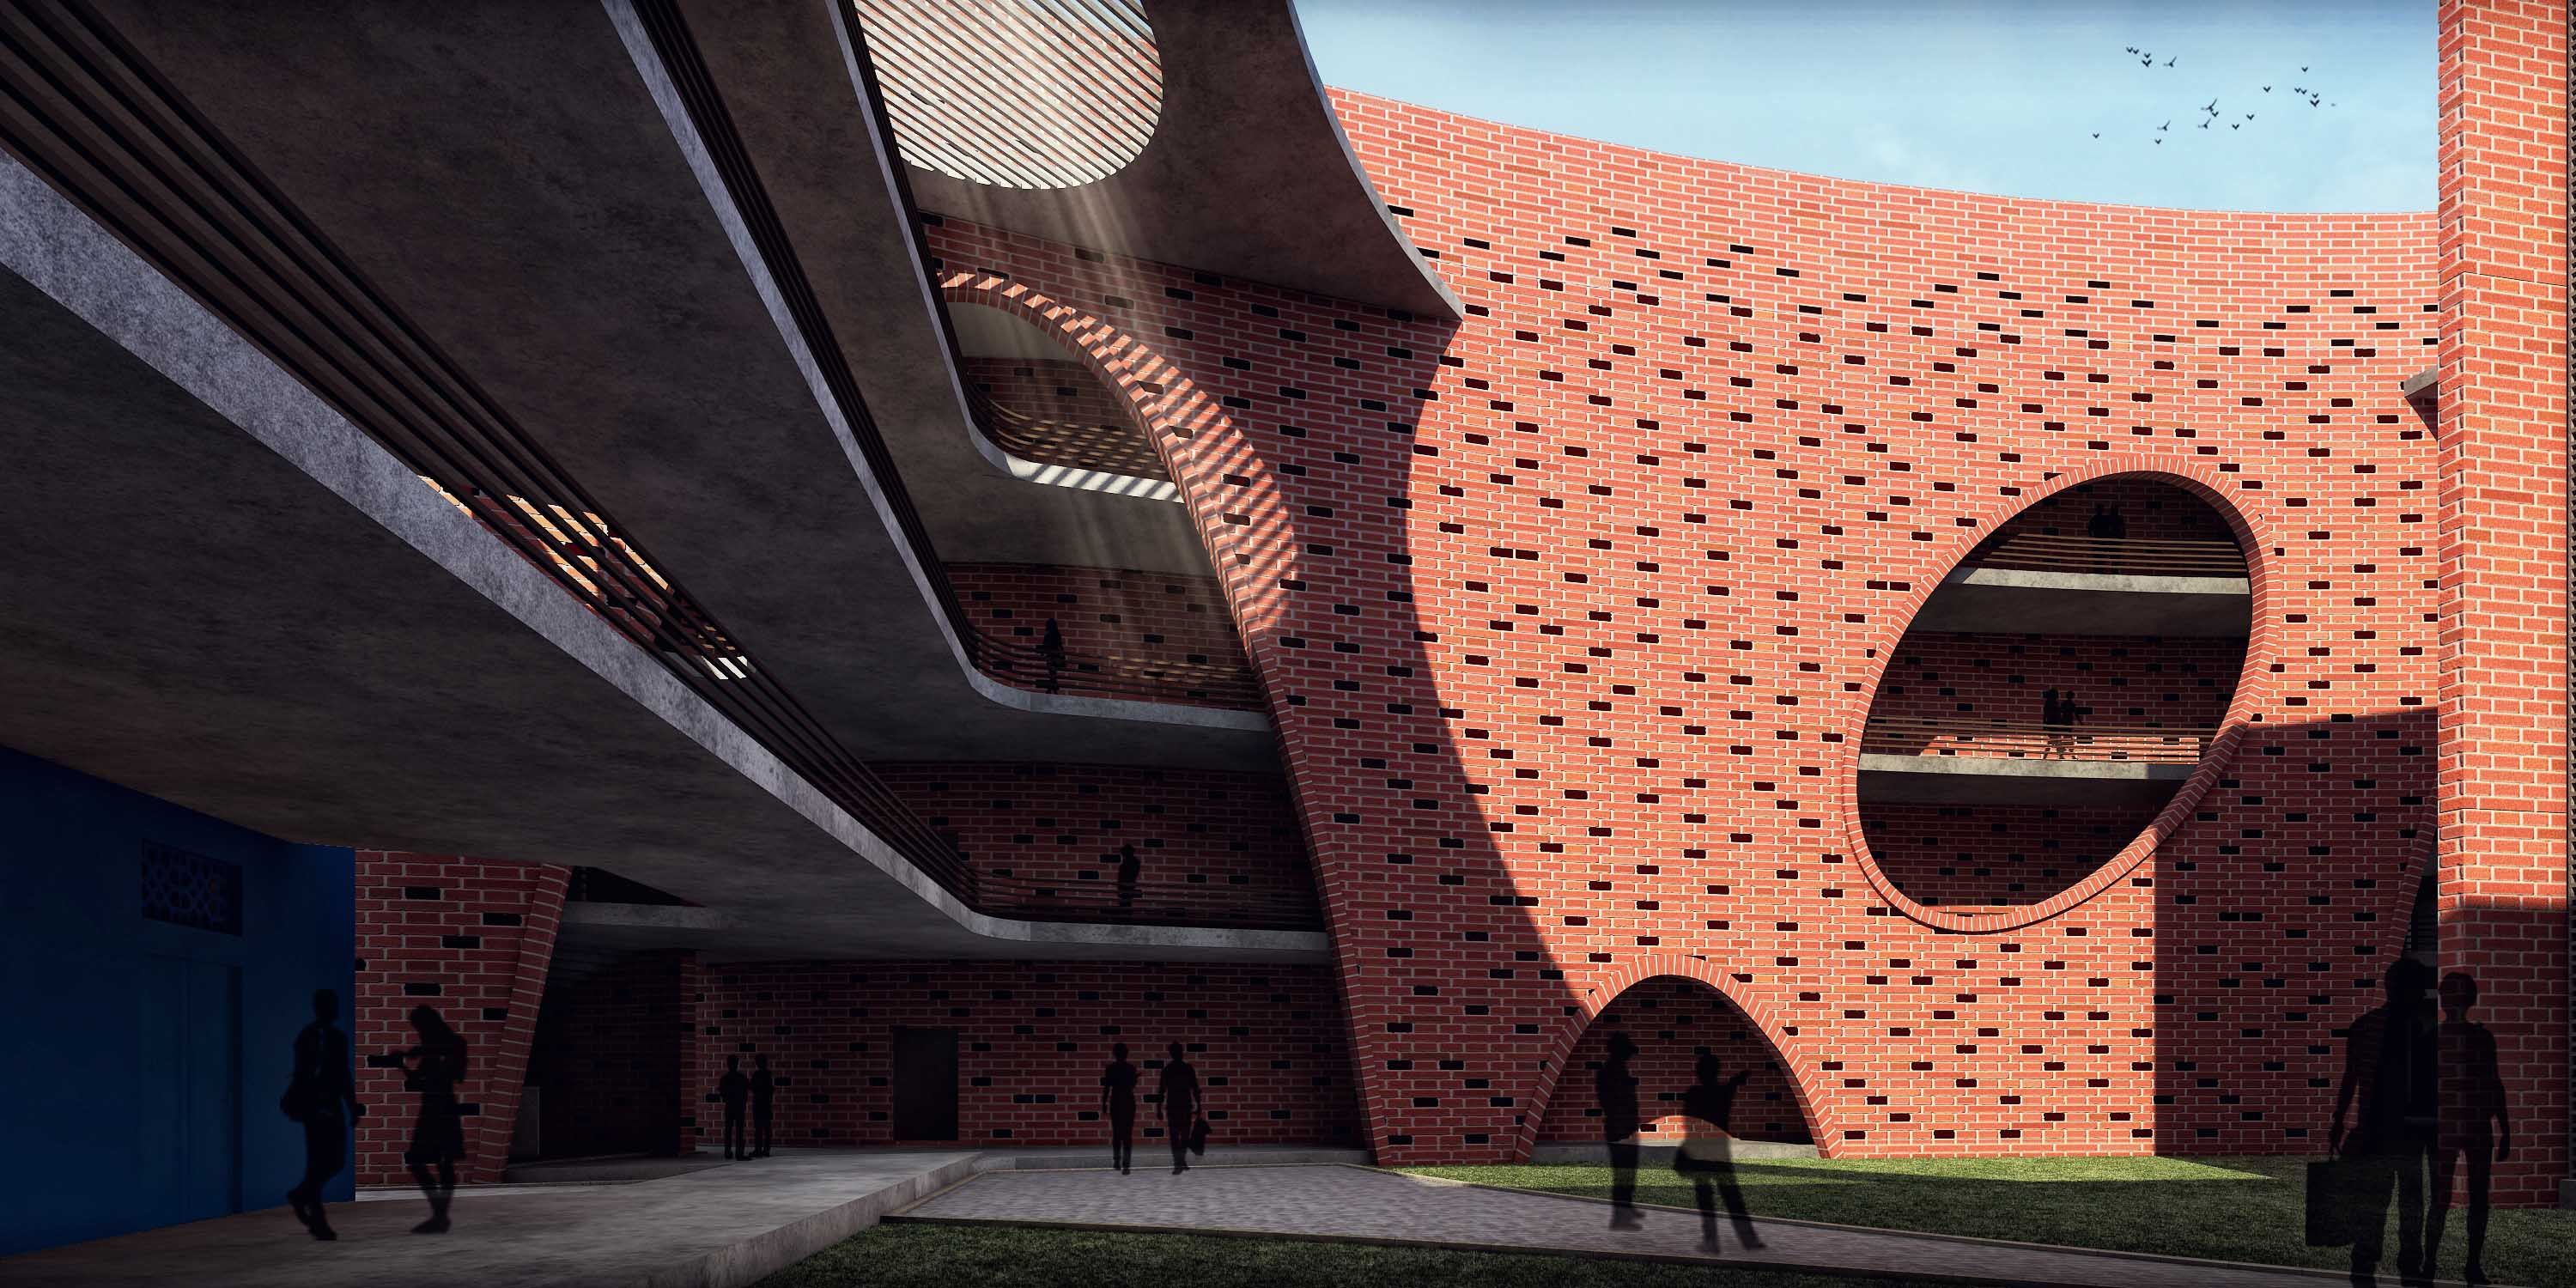 design ideas for institute design, Play of curves, Modern university in India